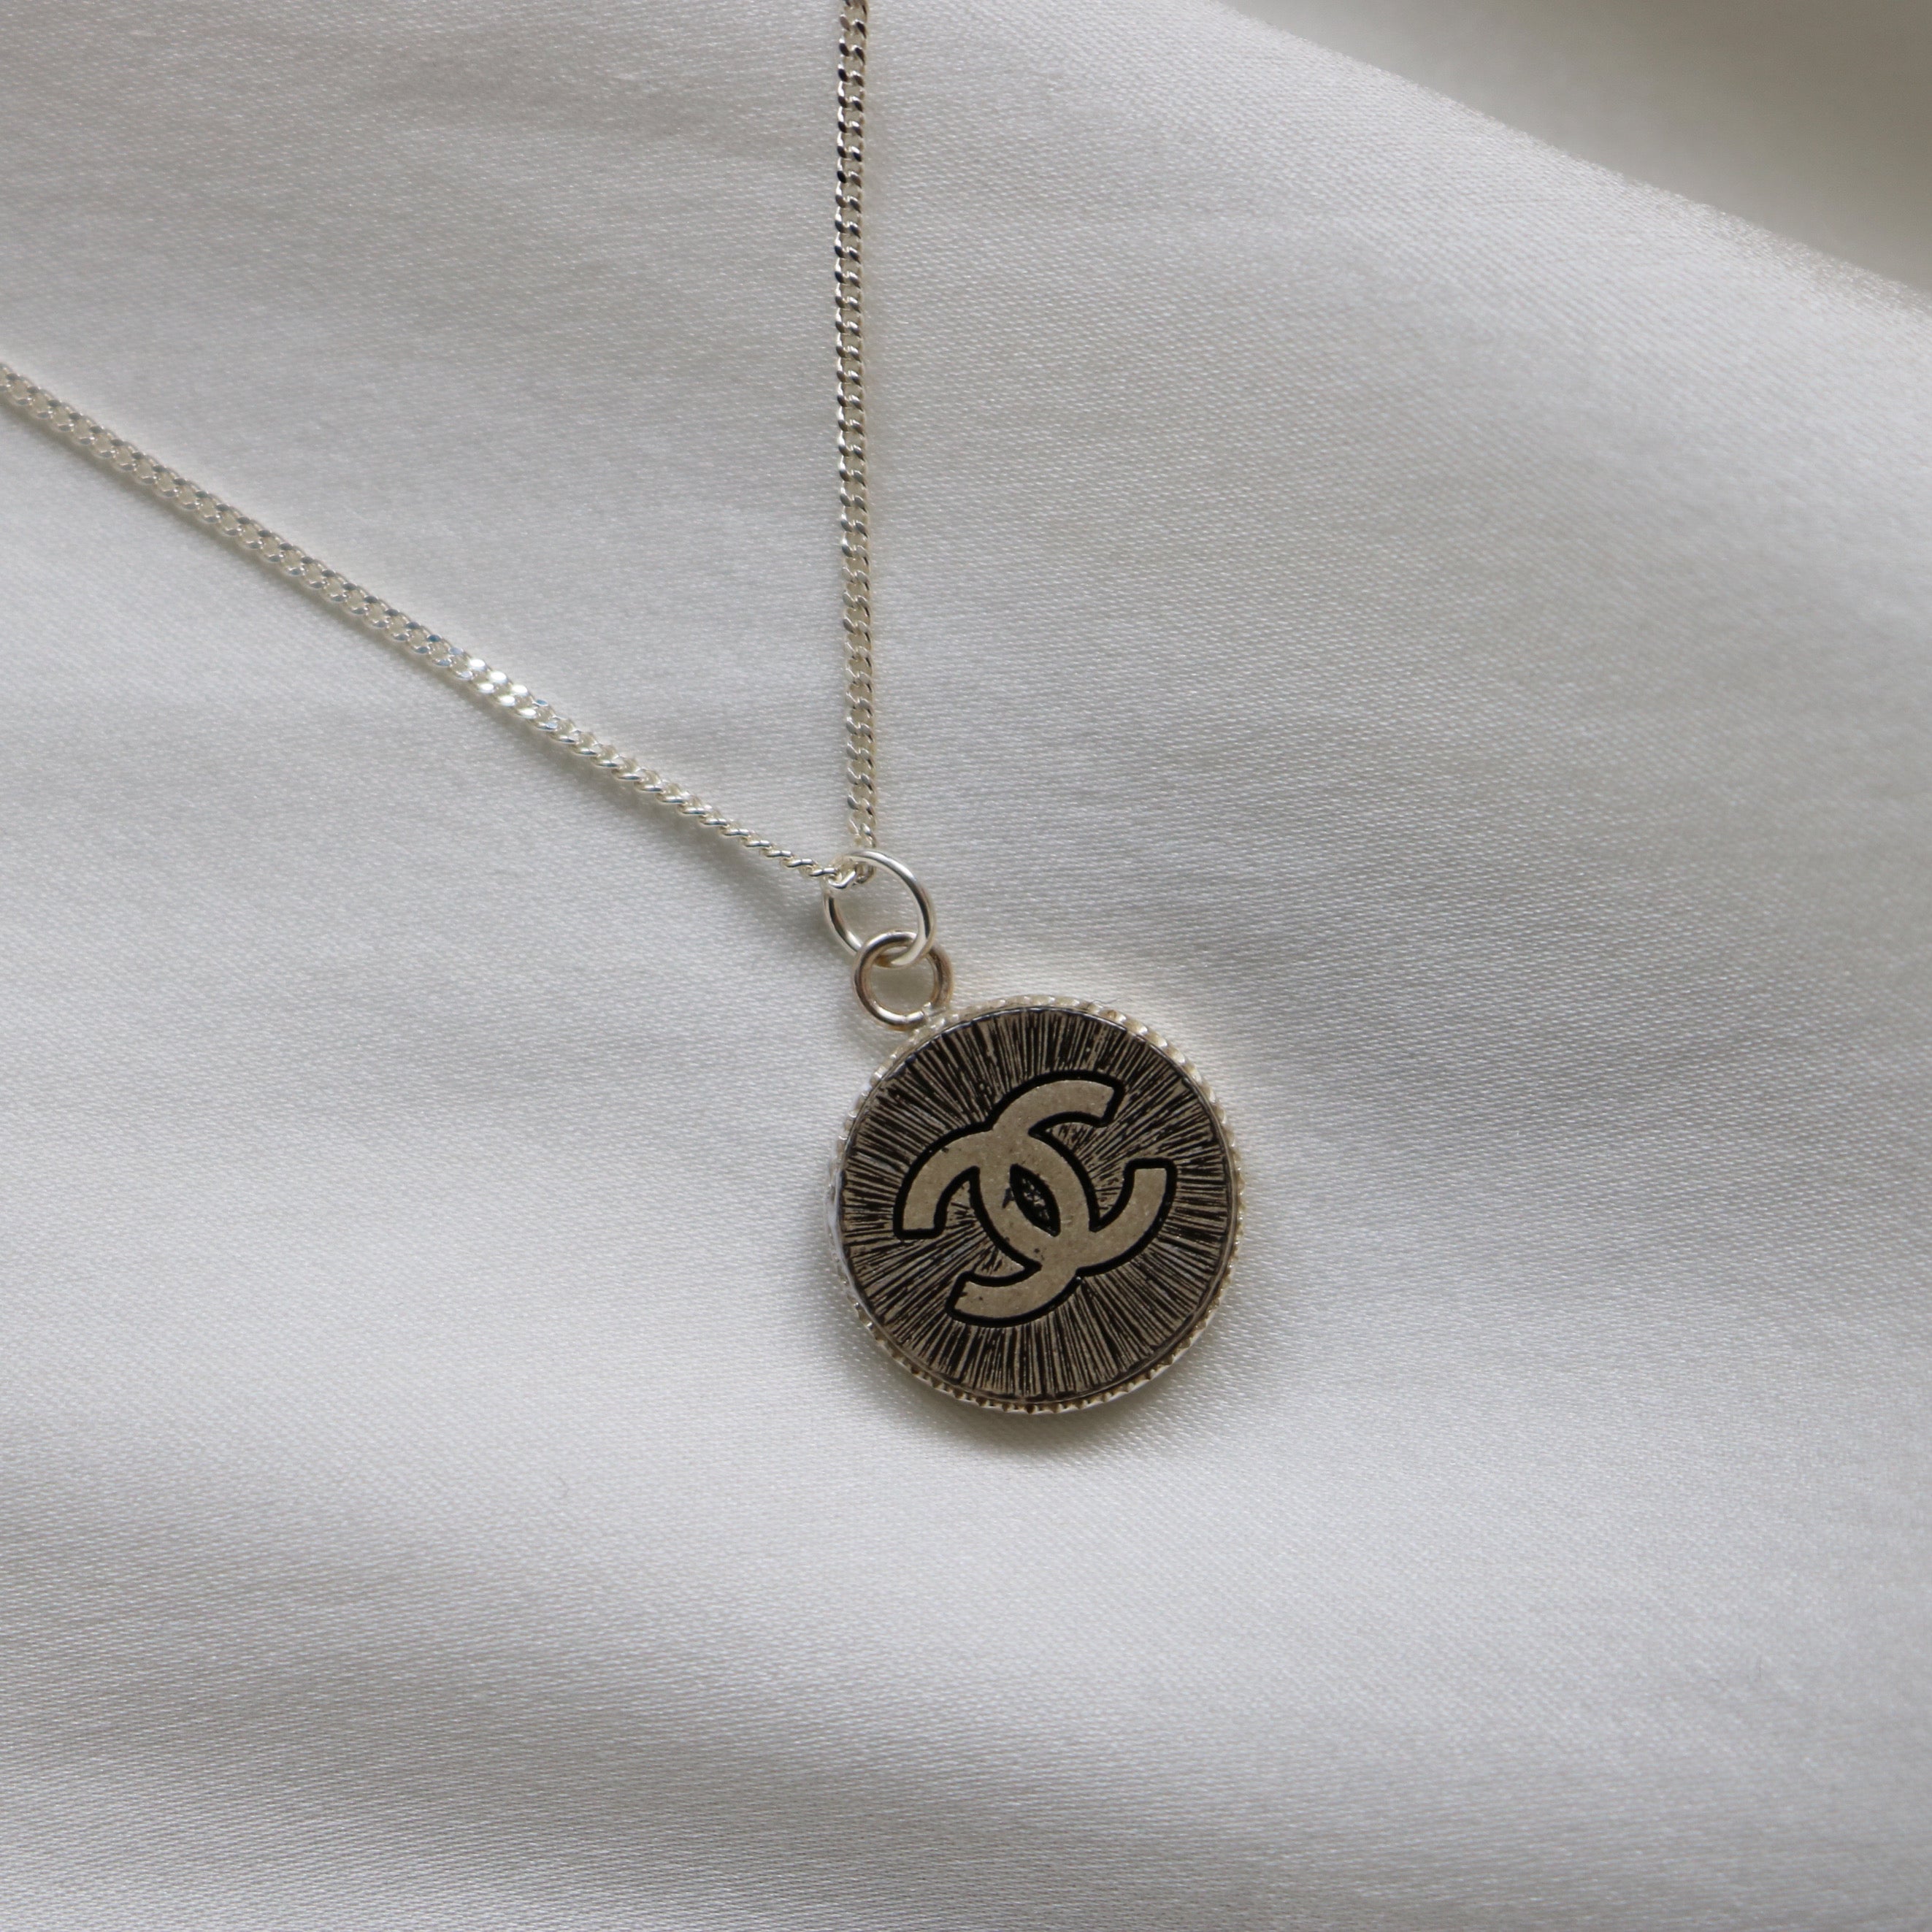 COLLIER UPCYCLÉ CHANEL | ARGENT 925